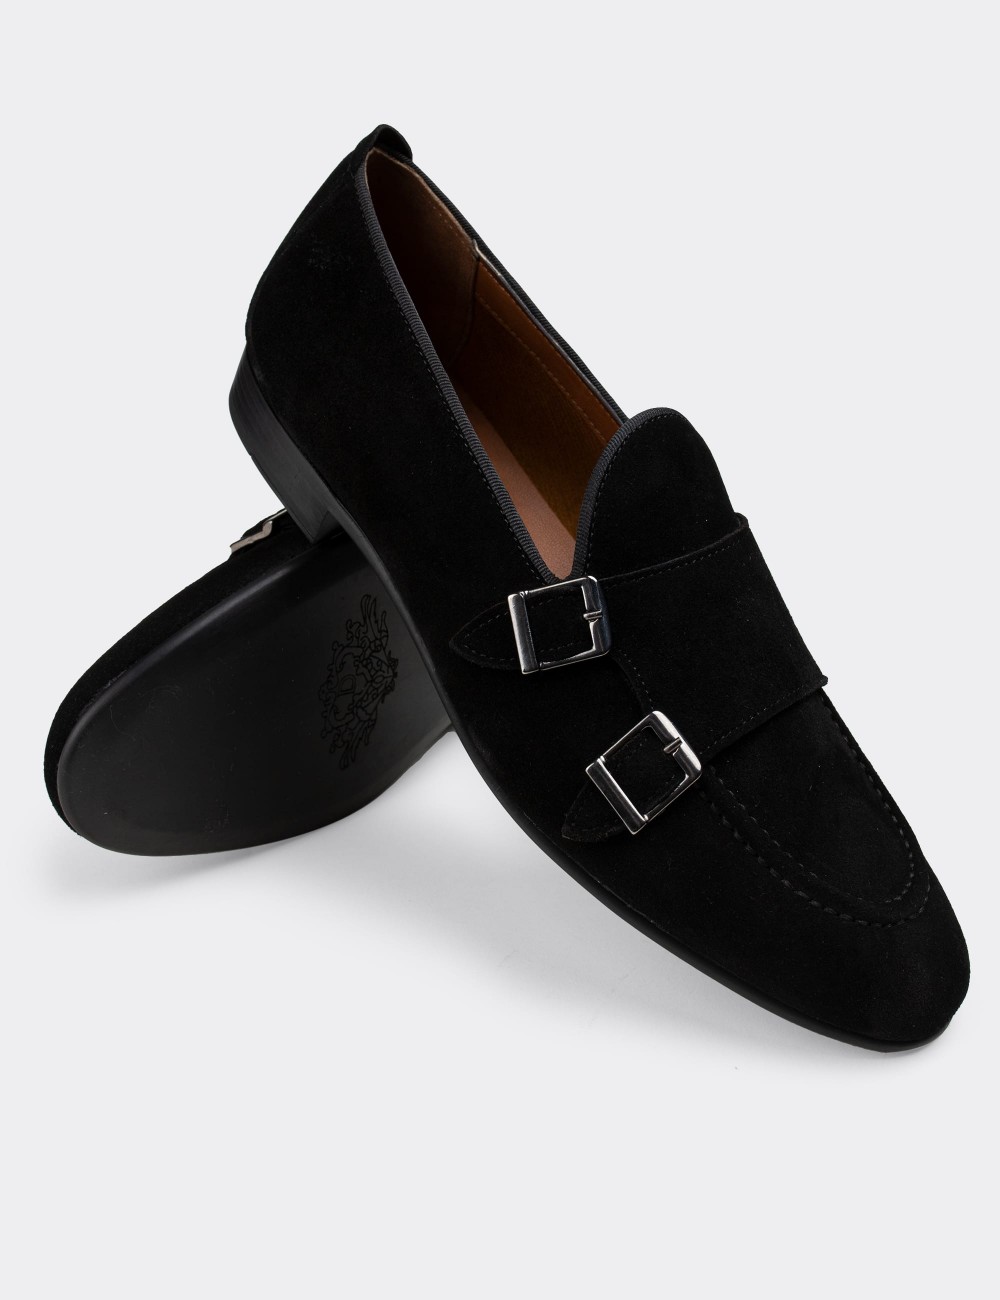 Black Suede Leather Double Monk-Strap Loafers - 01704MSYHC06